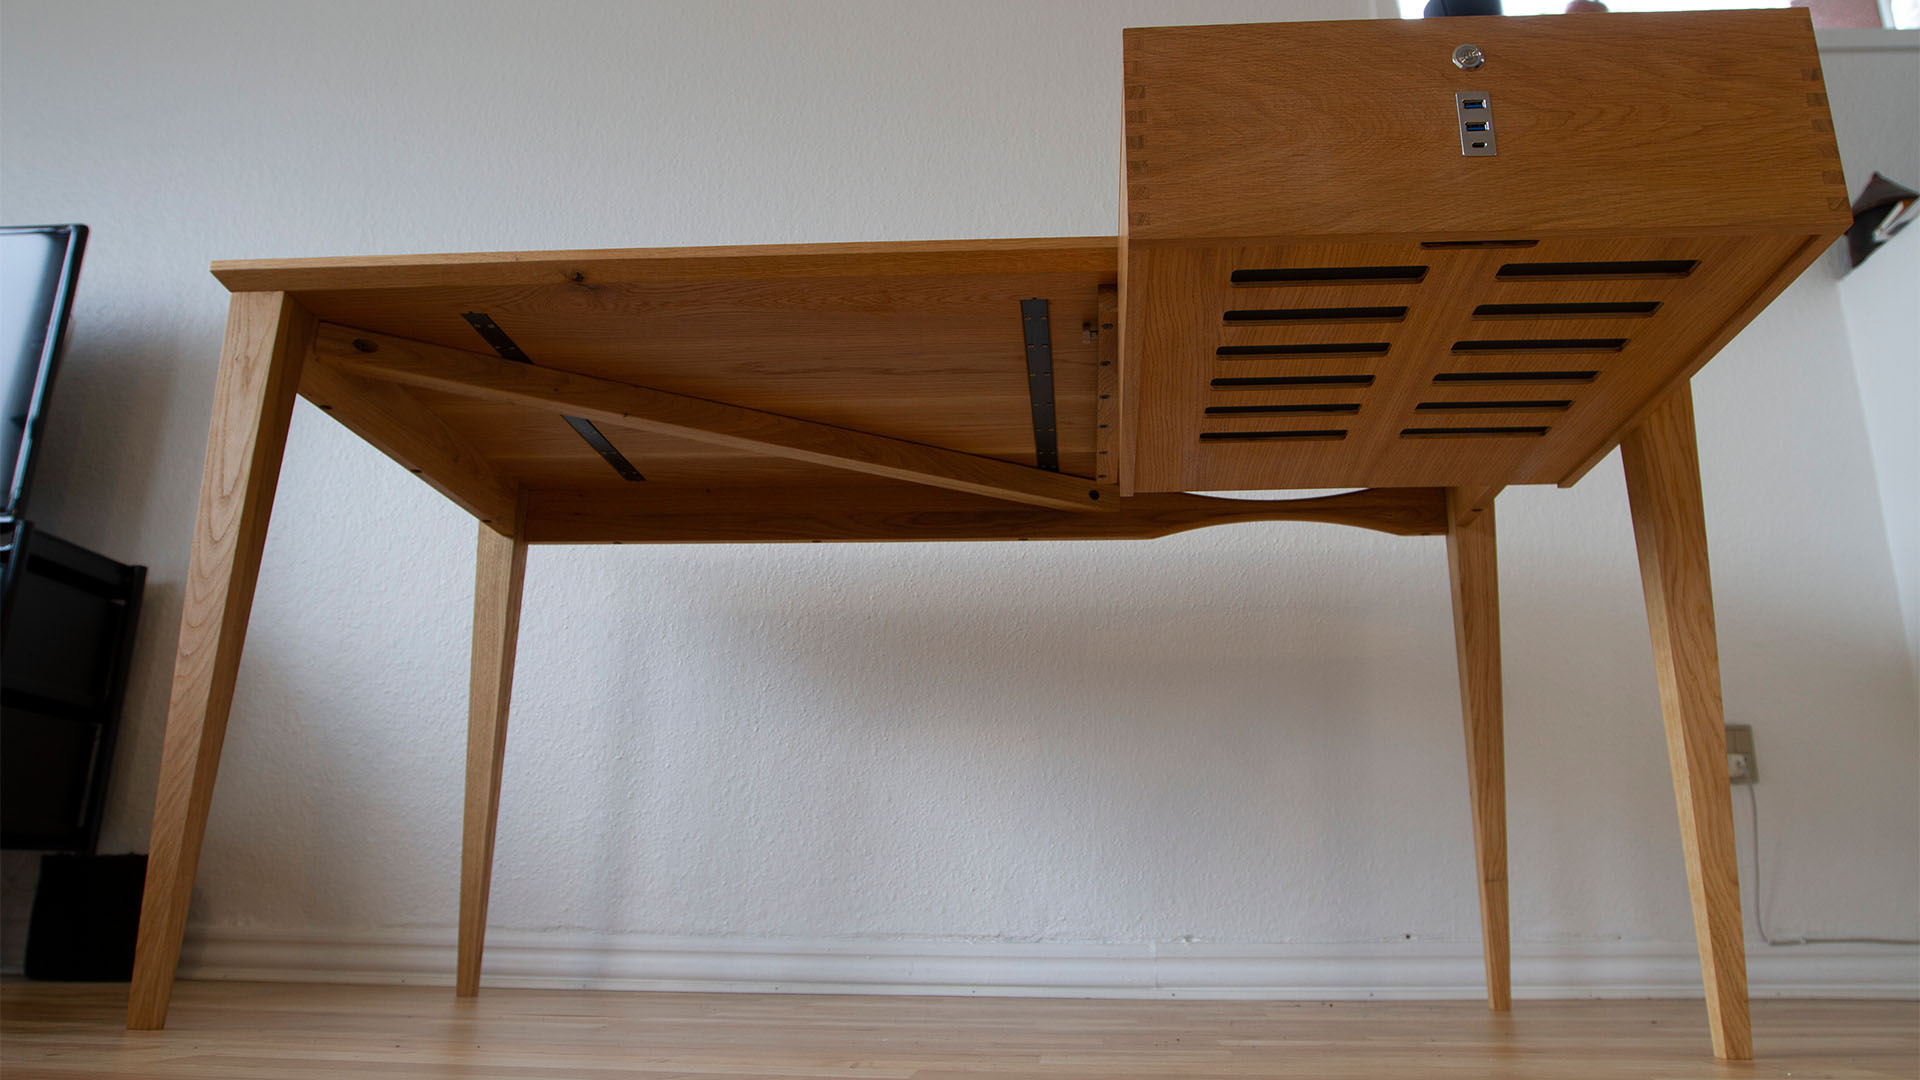 Wood water cooled desk PC: View from underneath